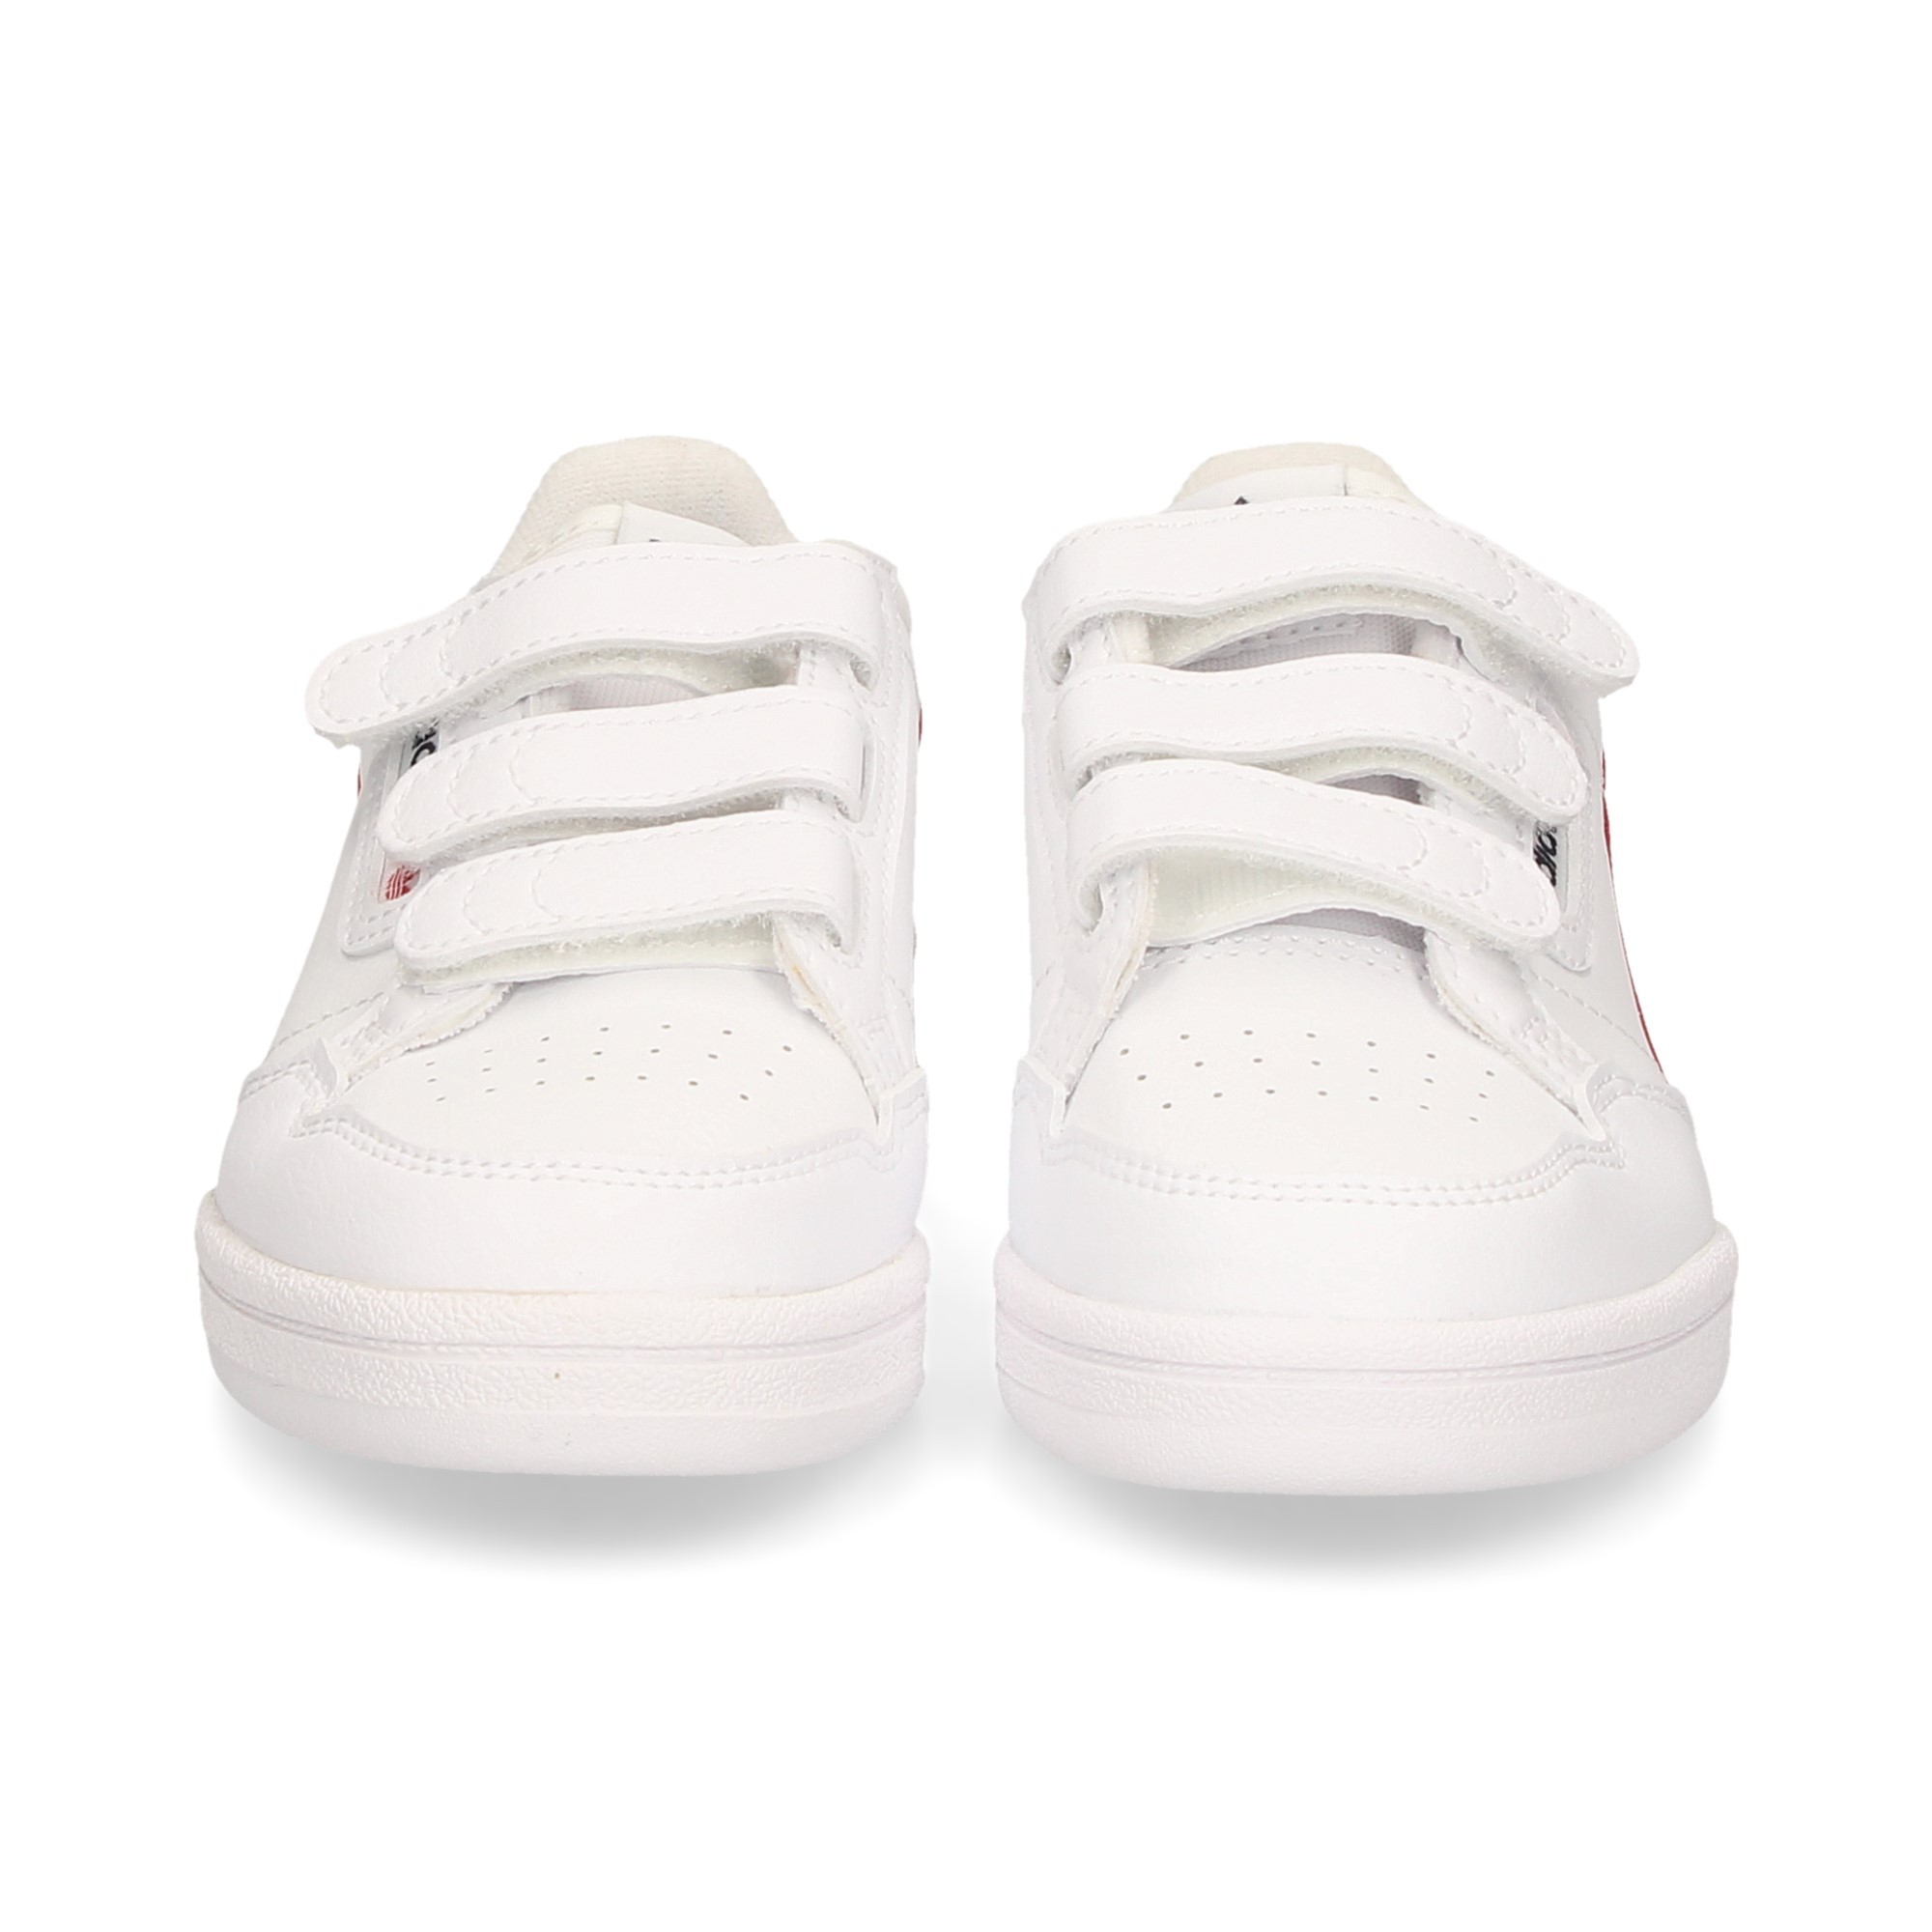 sporty-live-red-velcro-bianco-leather